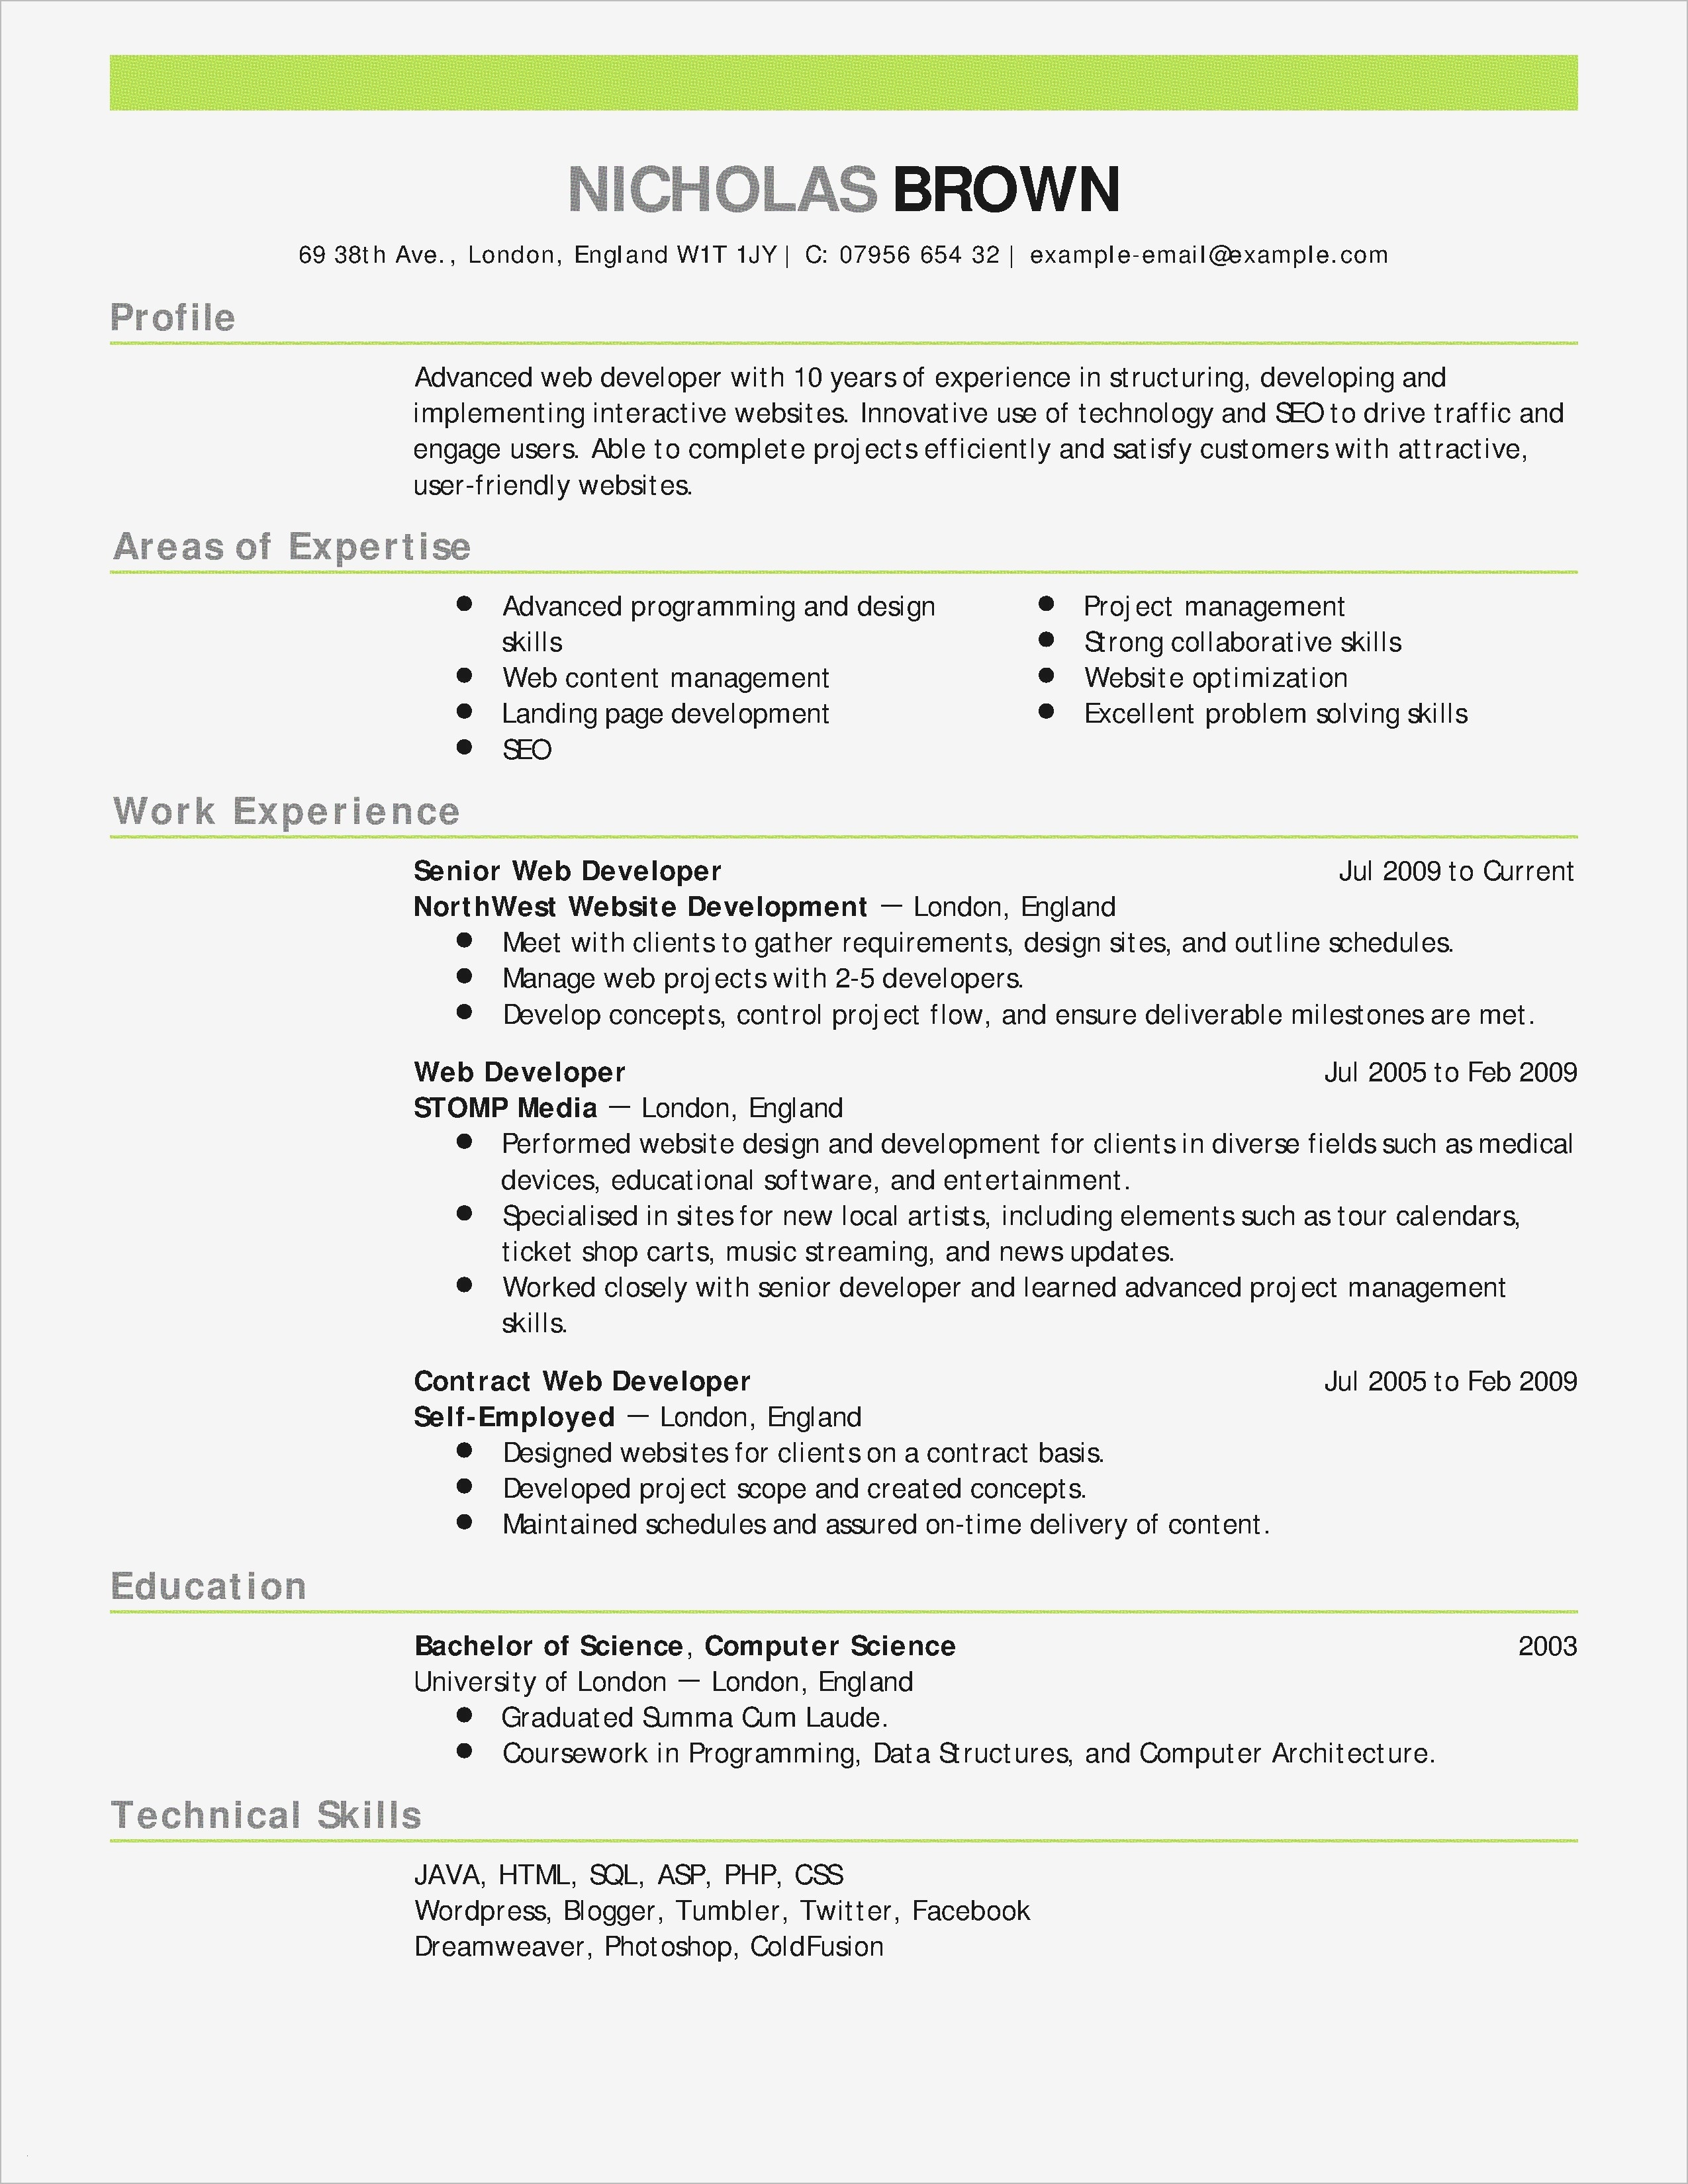 Free Online Resume Cover Letter Template - Professional Resume Template Free Line